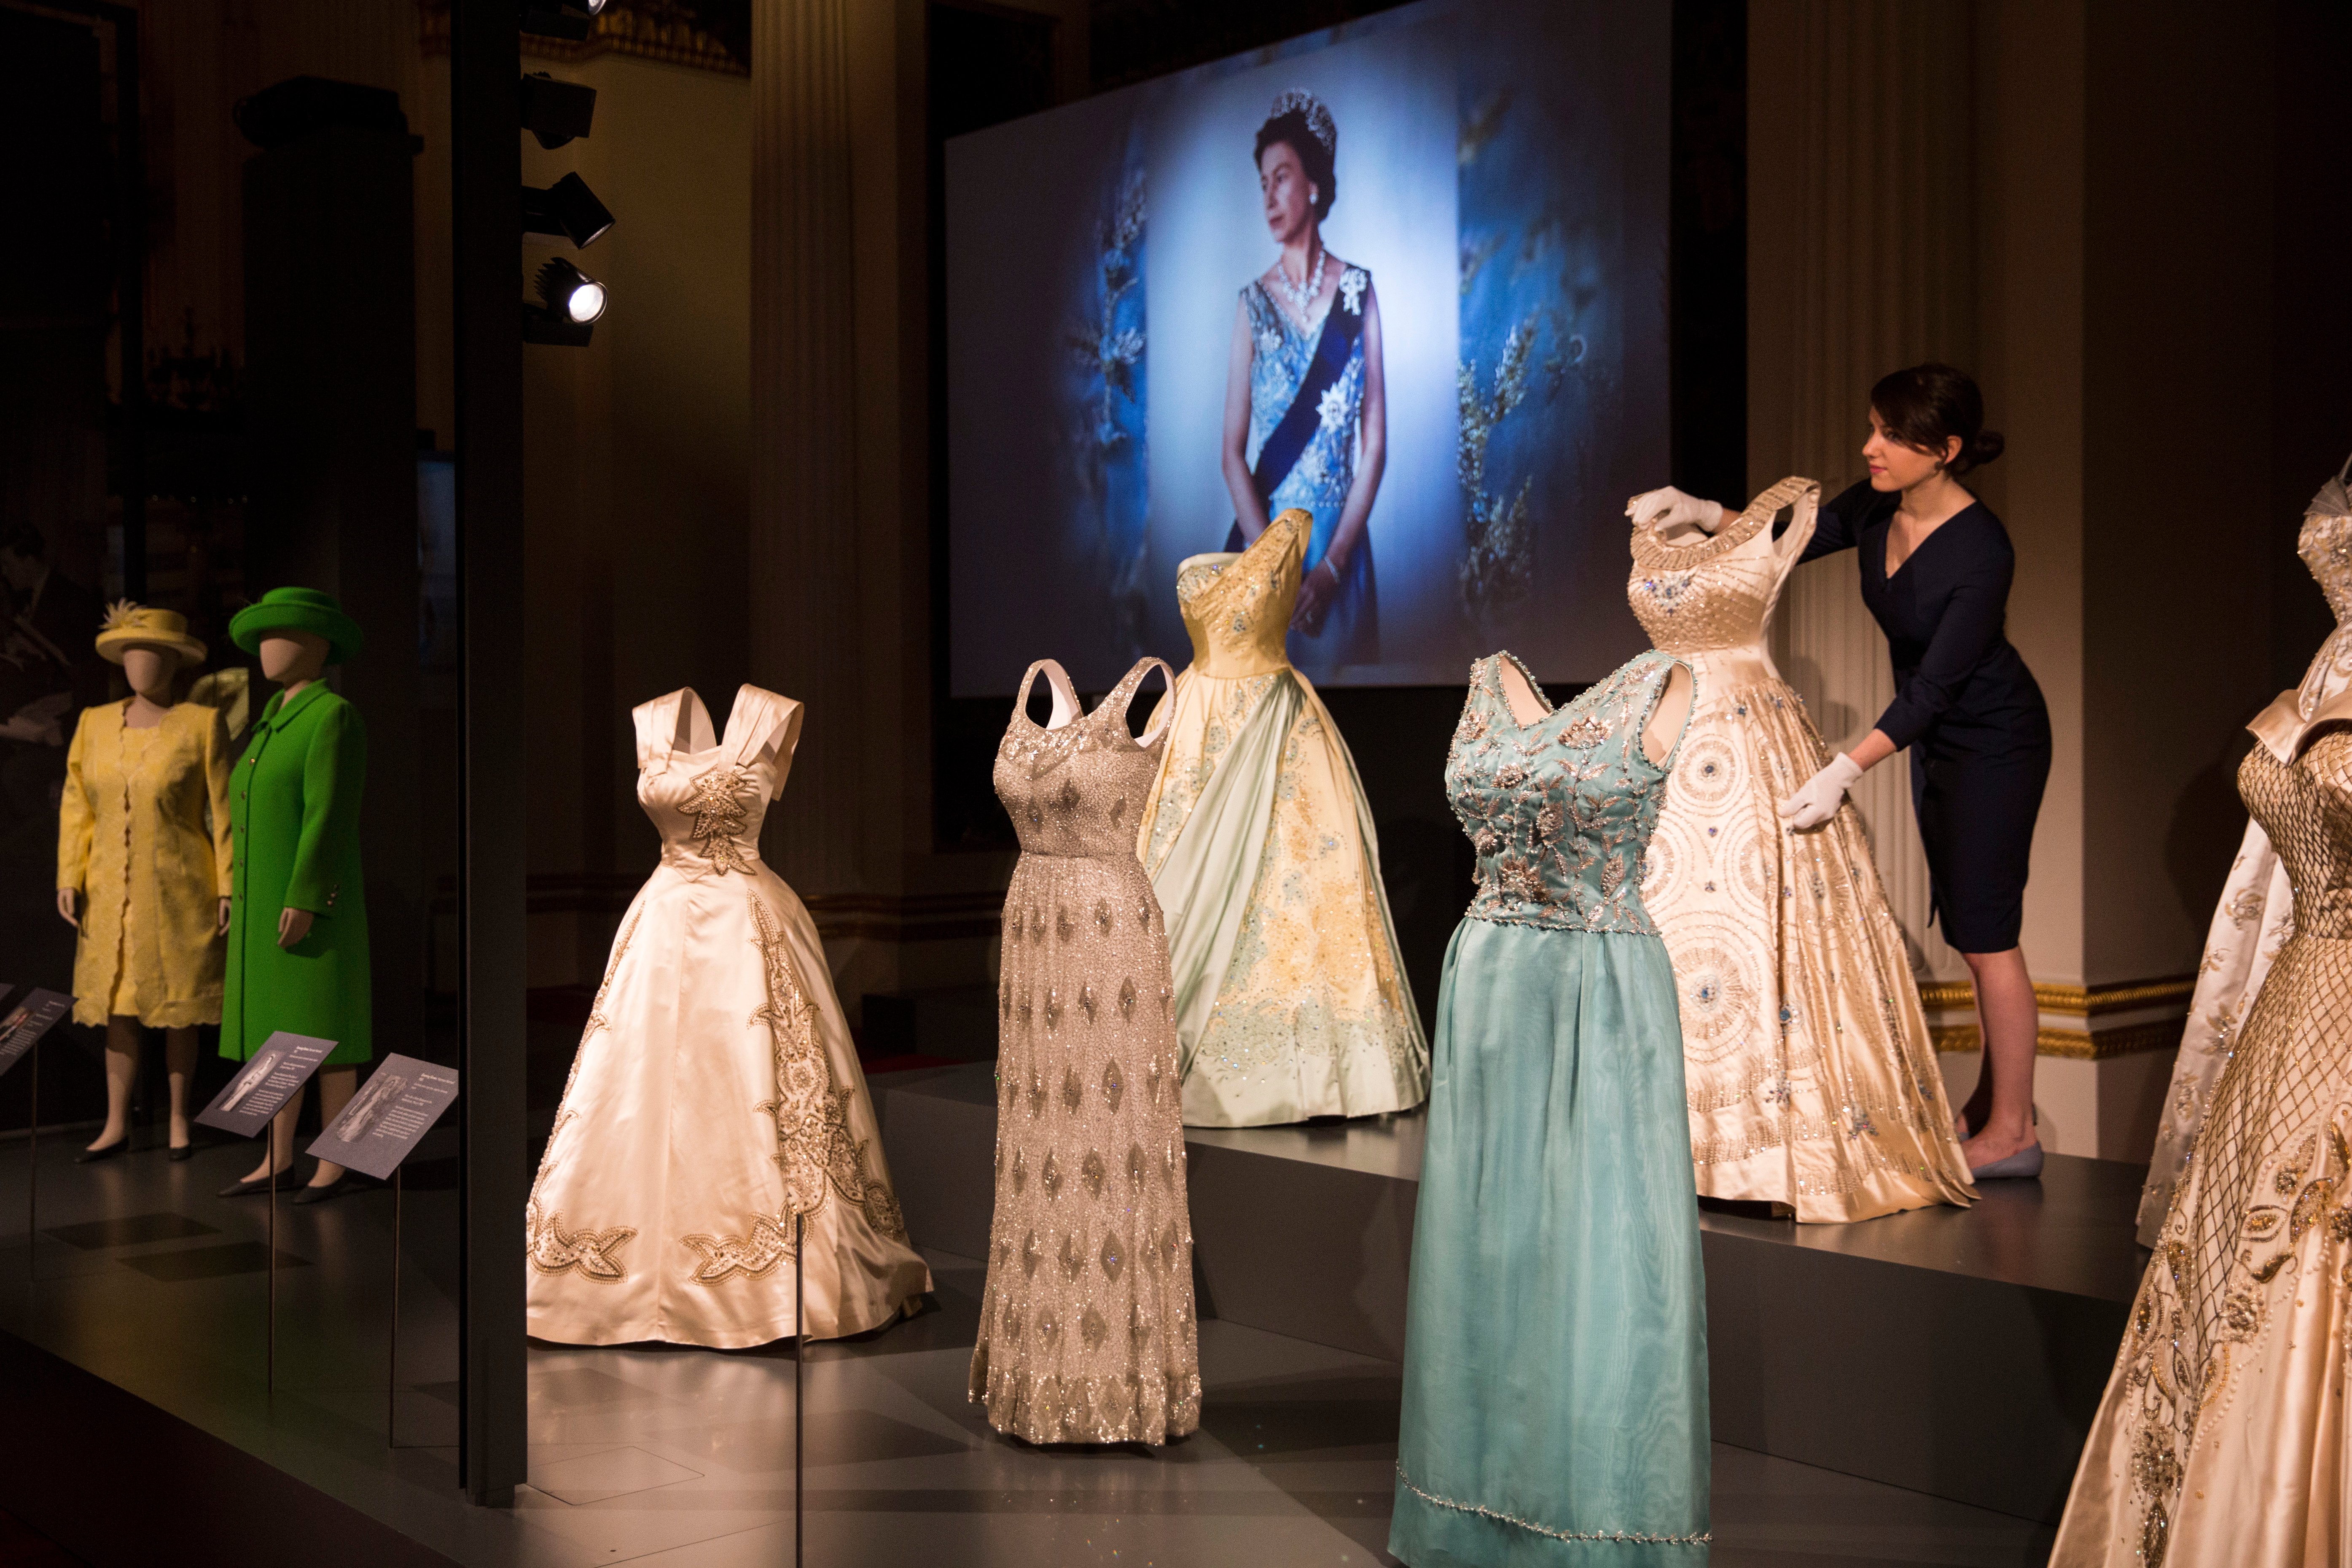 Outfits worn by Queen Elizabeth II are displayed at Buckingham Palace in "Fashioning a Reign: 90 Years of Style From the Queen's Wardrobe." Courtesy of Dan Kitwood/Getty Images.